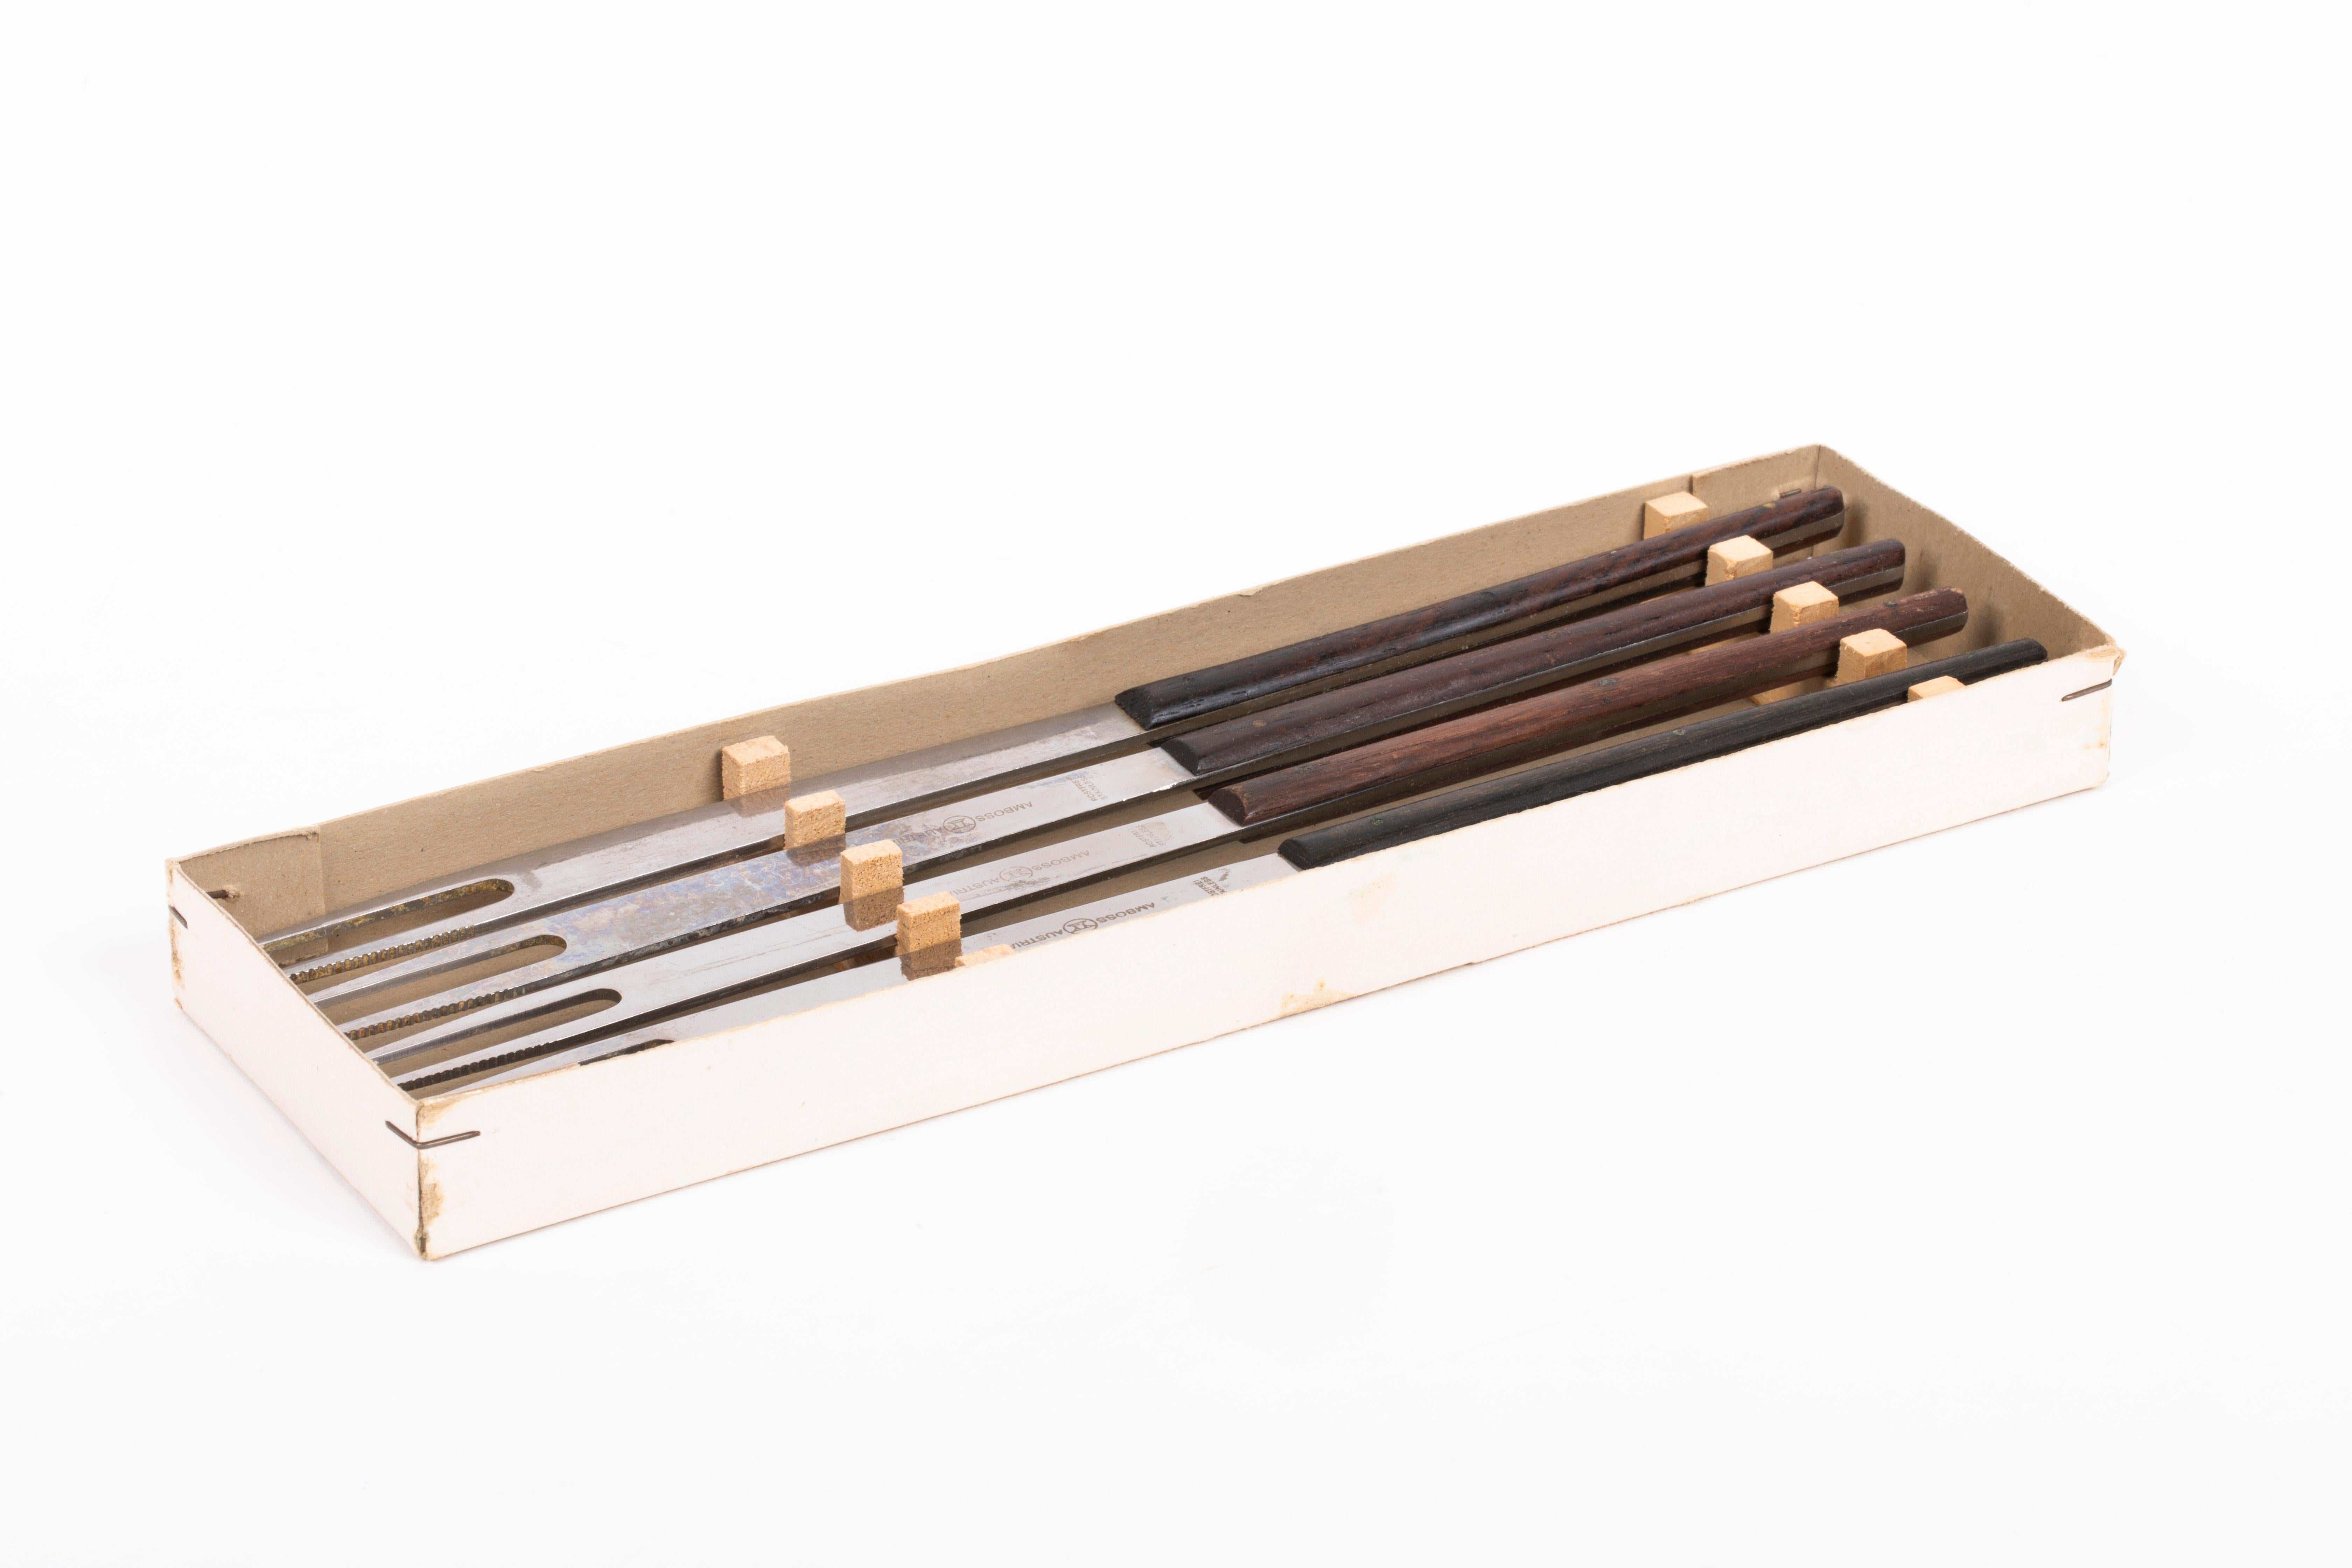 Carl Auböck Set of 4 Fondue Forks, Austria 1960s. The measurements given apply to one fork. The box is 25.5 cm wide, 2cm deep and 7.5 cm high. 